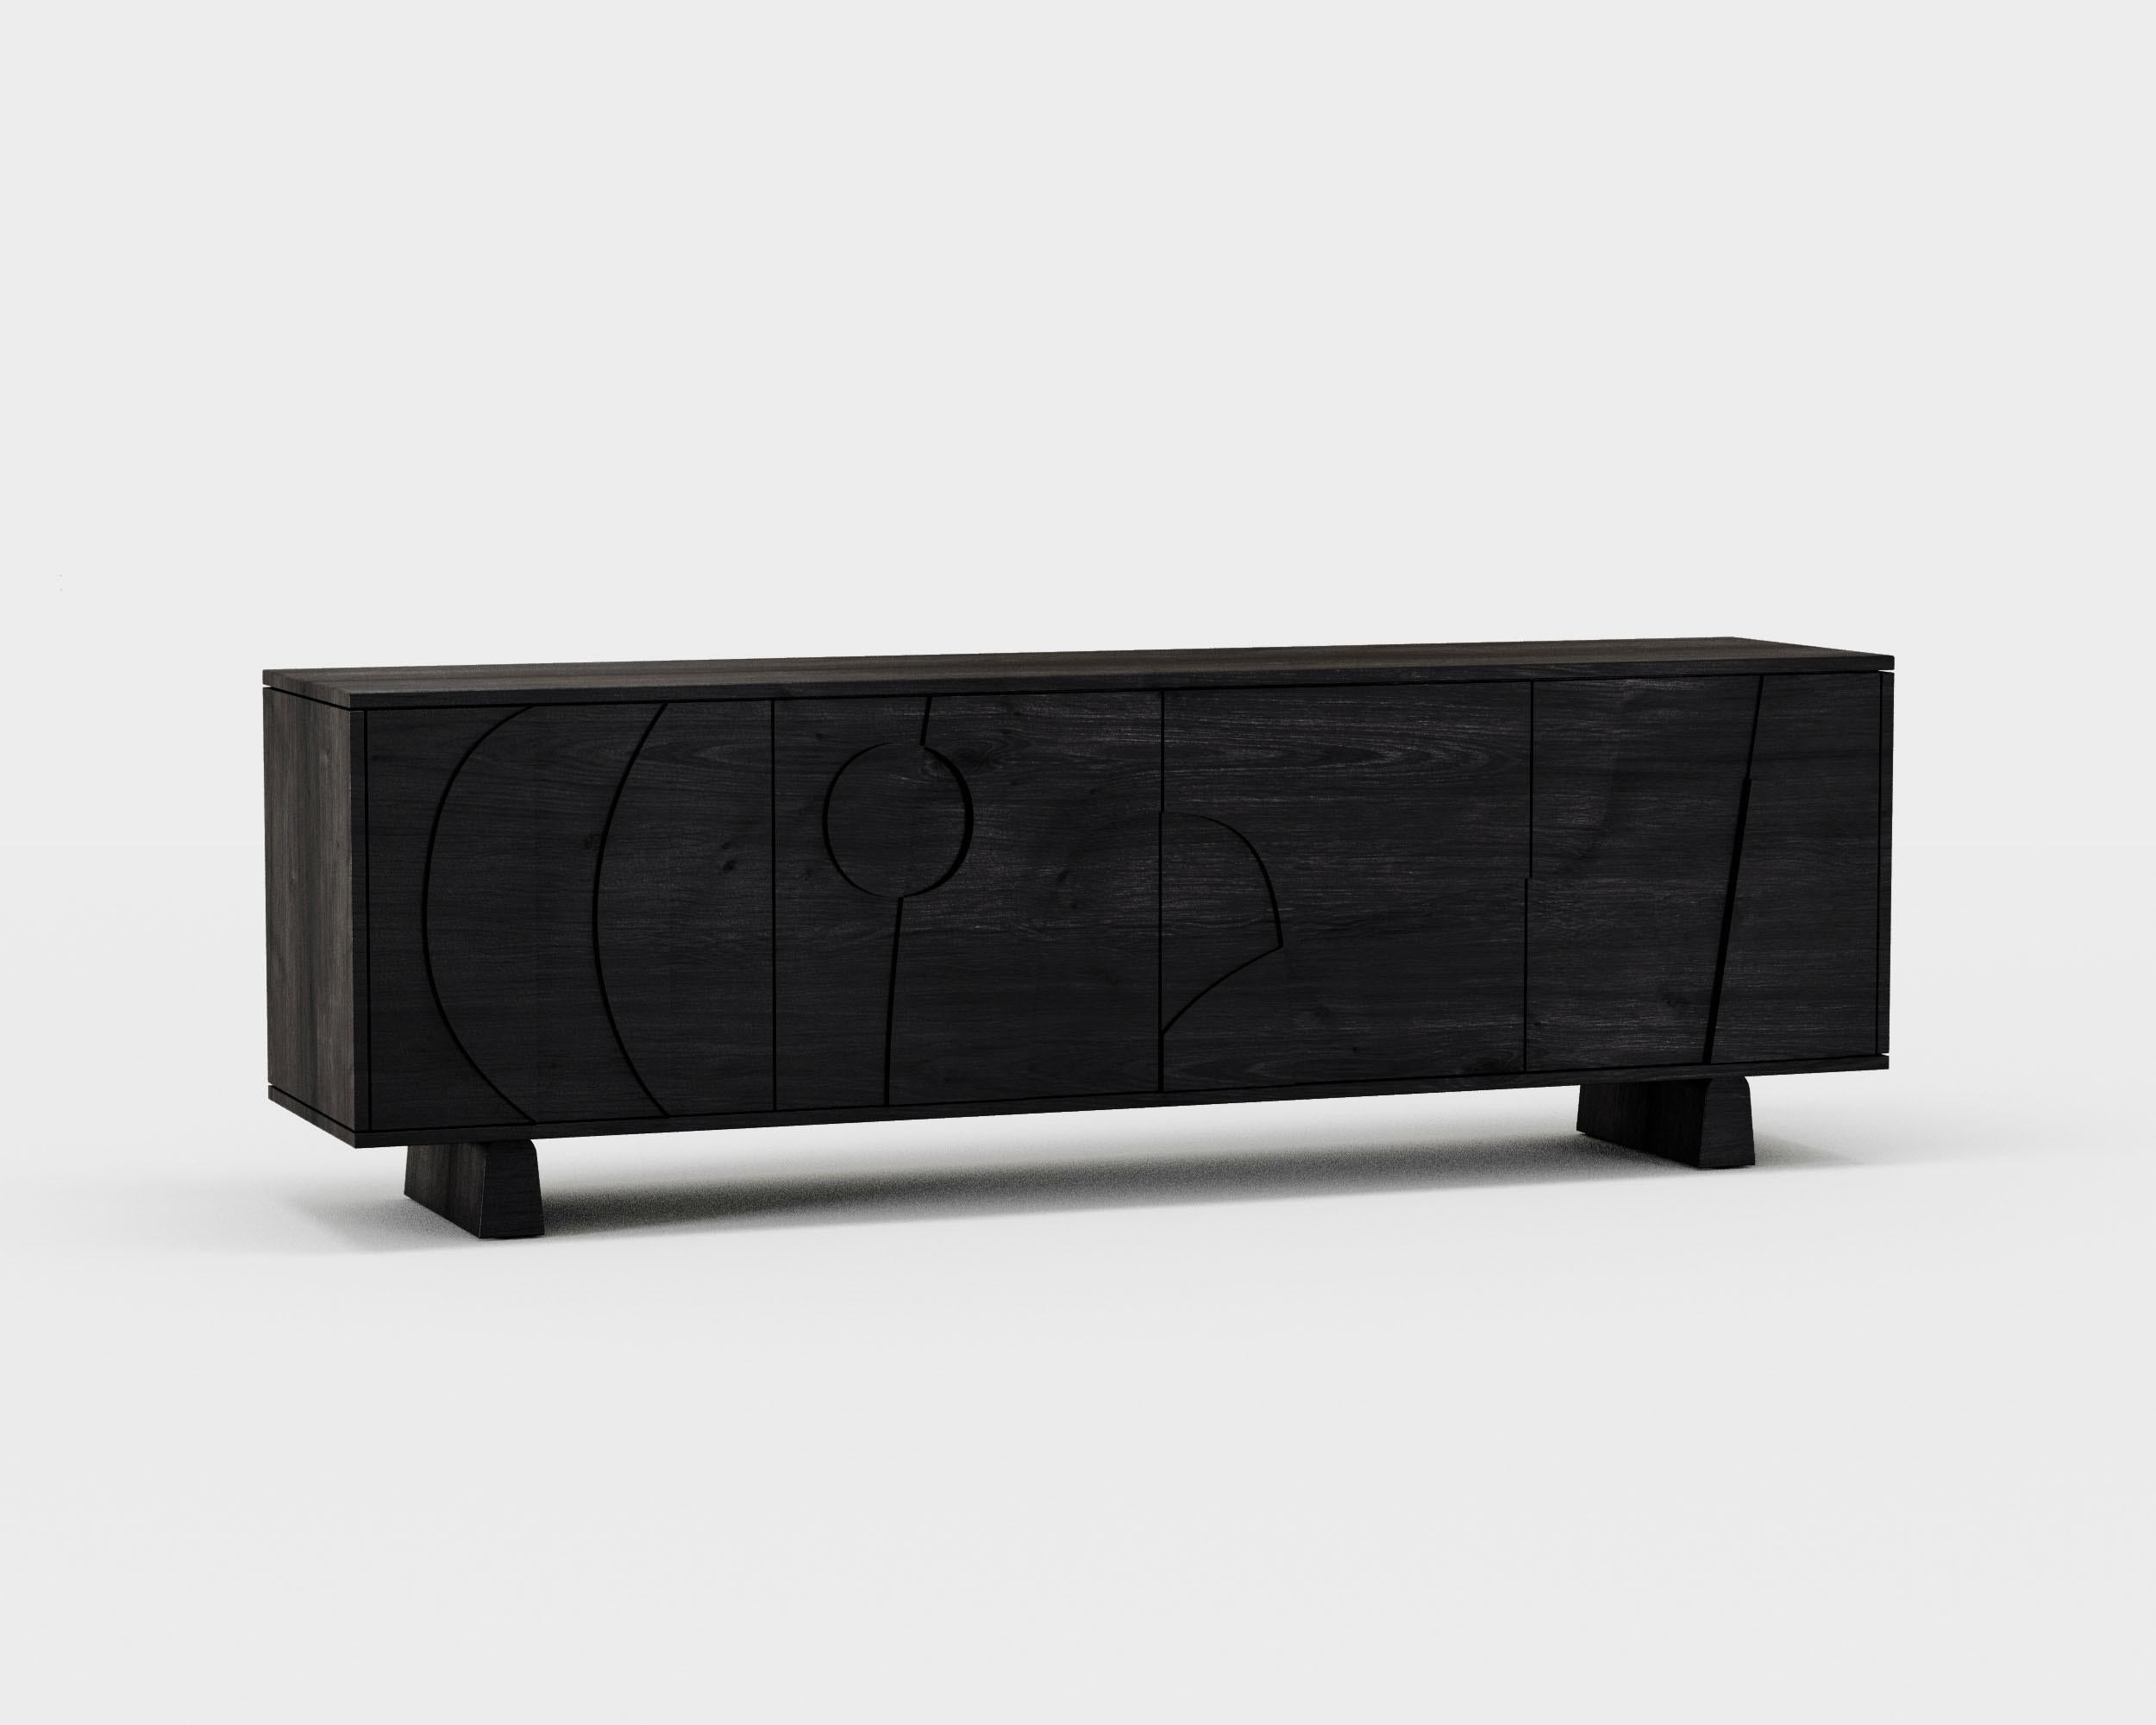 'Wynwood' 4 Sideboard by Man of Parts
Signed by Sebastian Herkner

Dimensions: H. 68 x 49 x 213.5 cm
Available in various finishes: Black oak, nude oak, whiskey oak
Leg height available: Tall, Short, Wall mount

Model shown: Black oak finish, Short